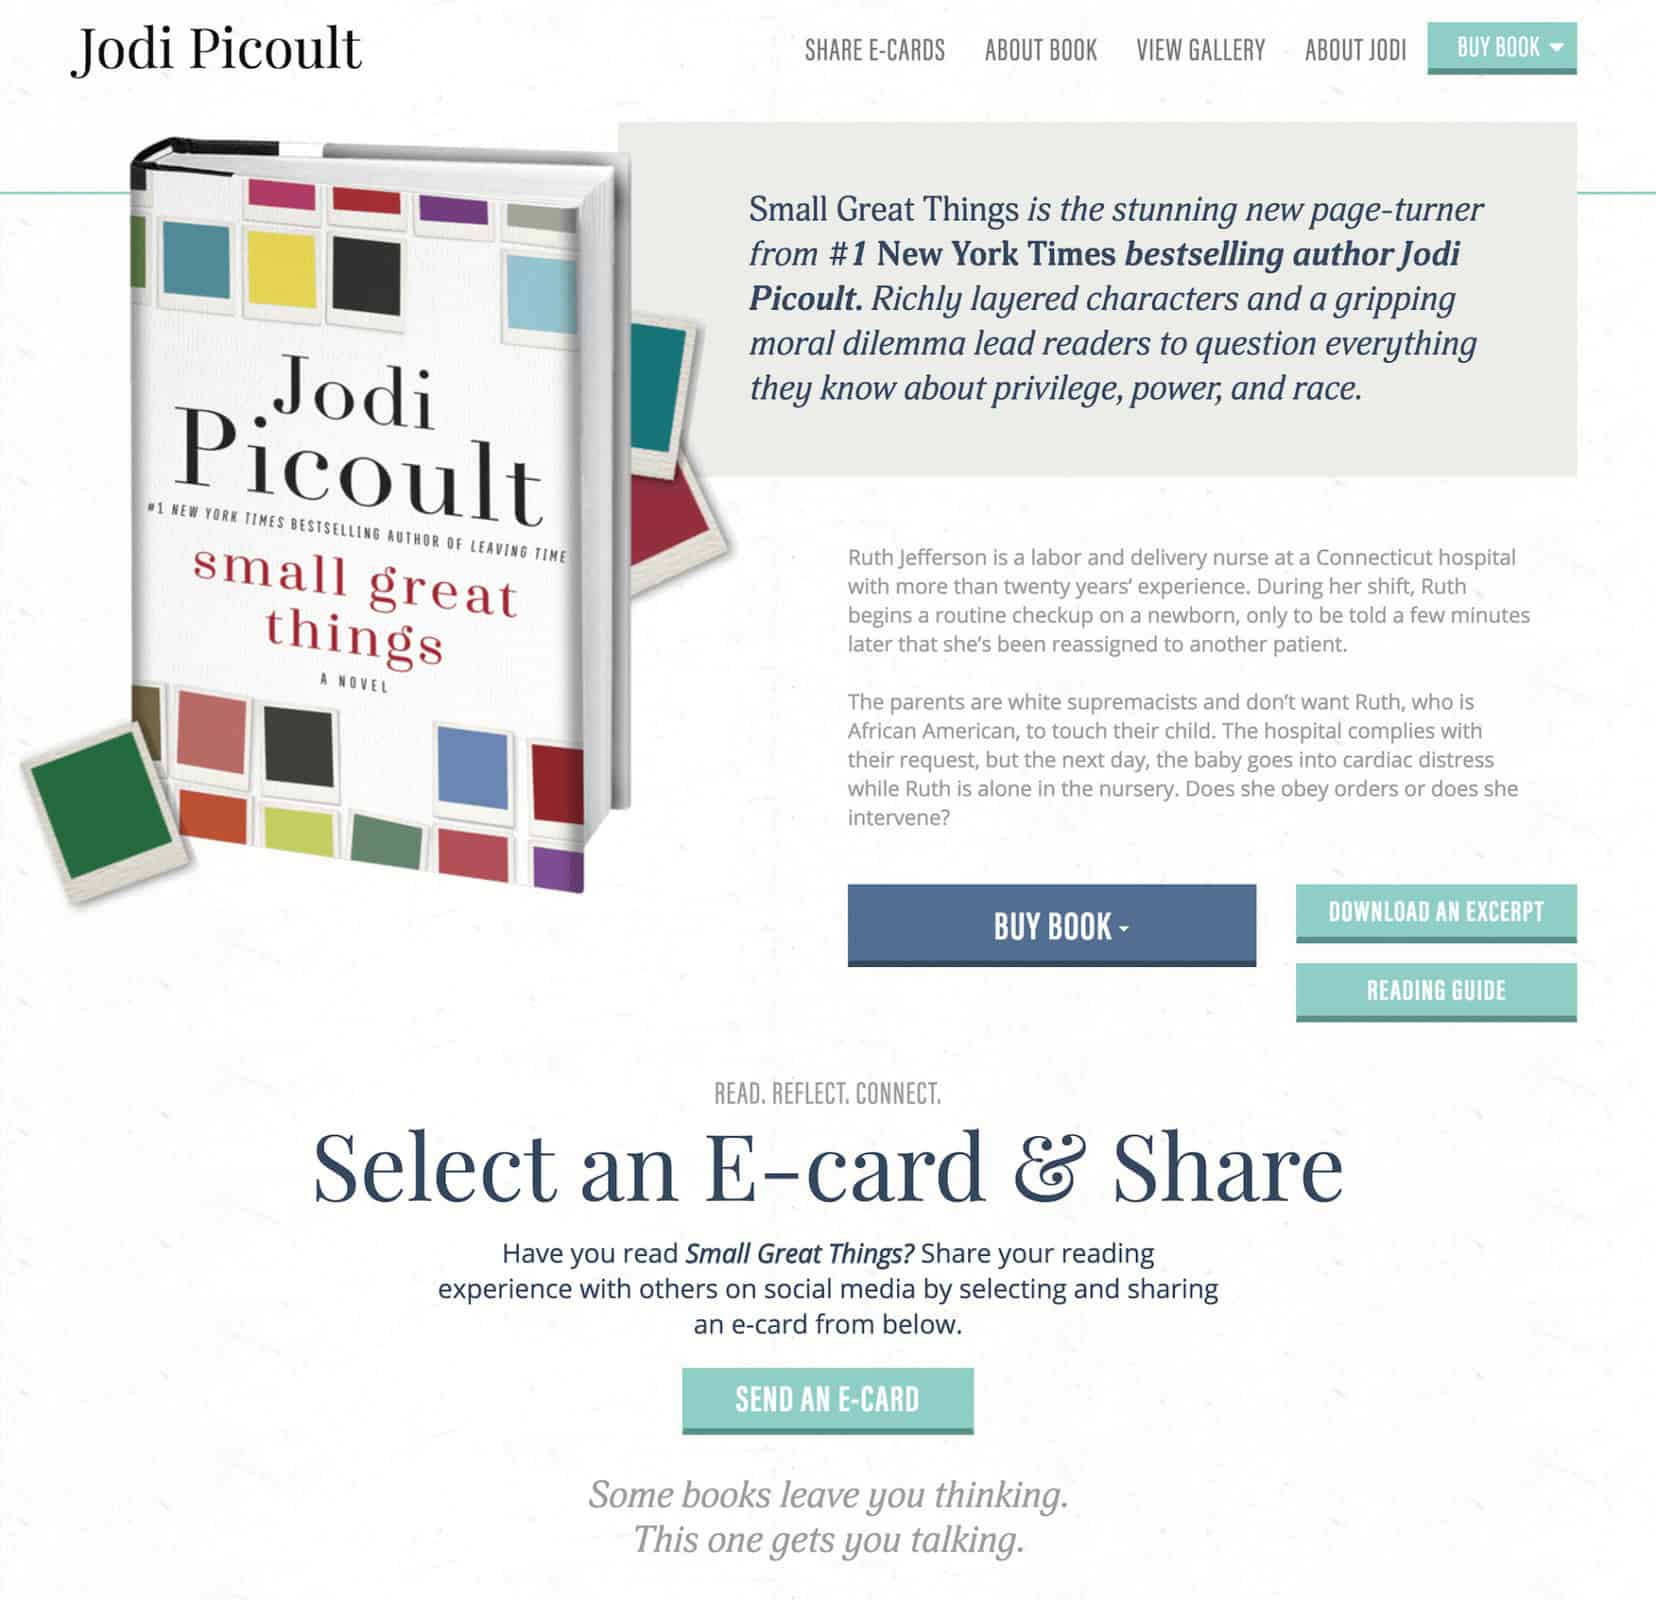 Jodi Picoult: Small Great Things Book Release e-card Creation 